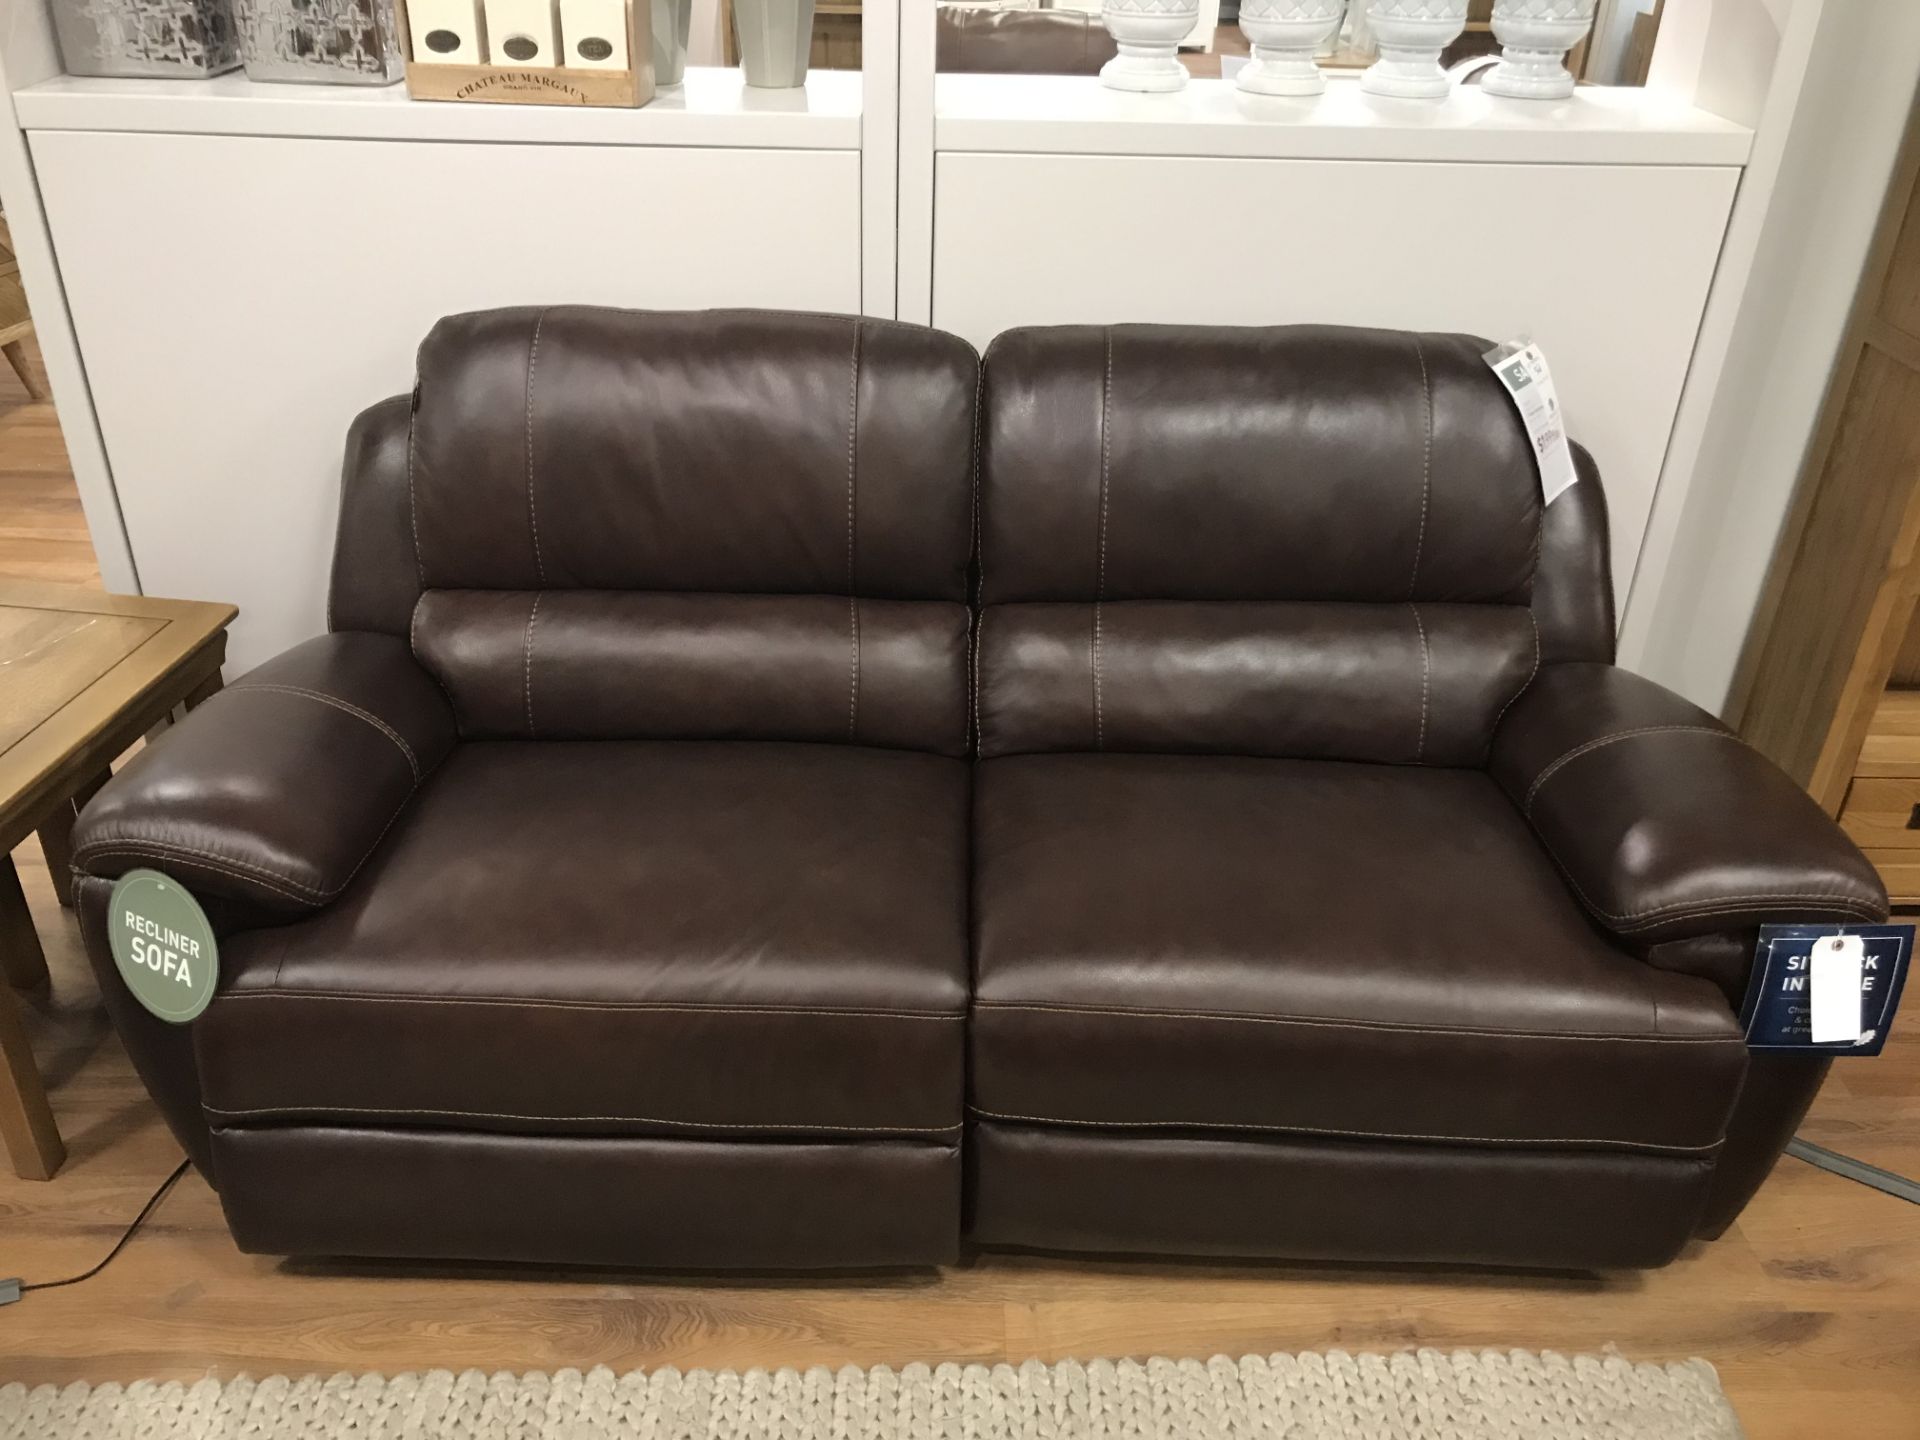 3 Seater Reclining Sofa (Finley)See Picture For Dimensions and Product Info